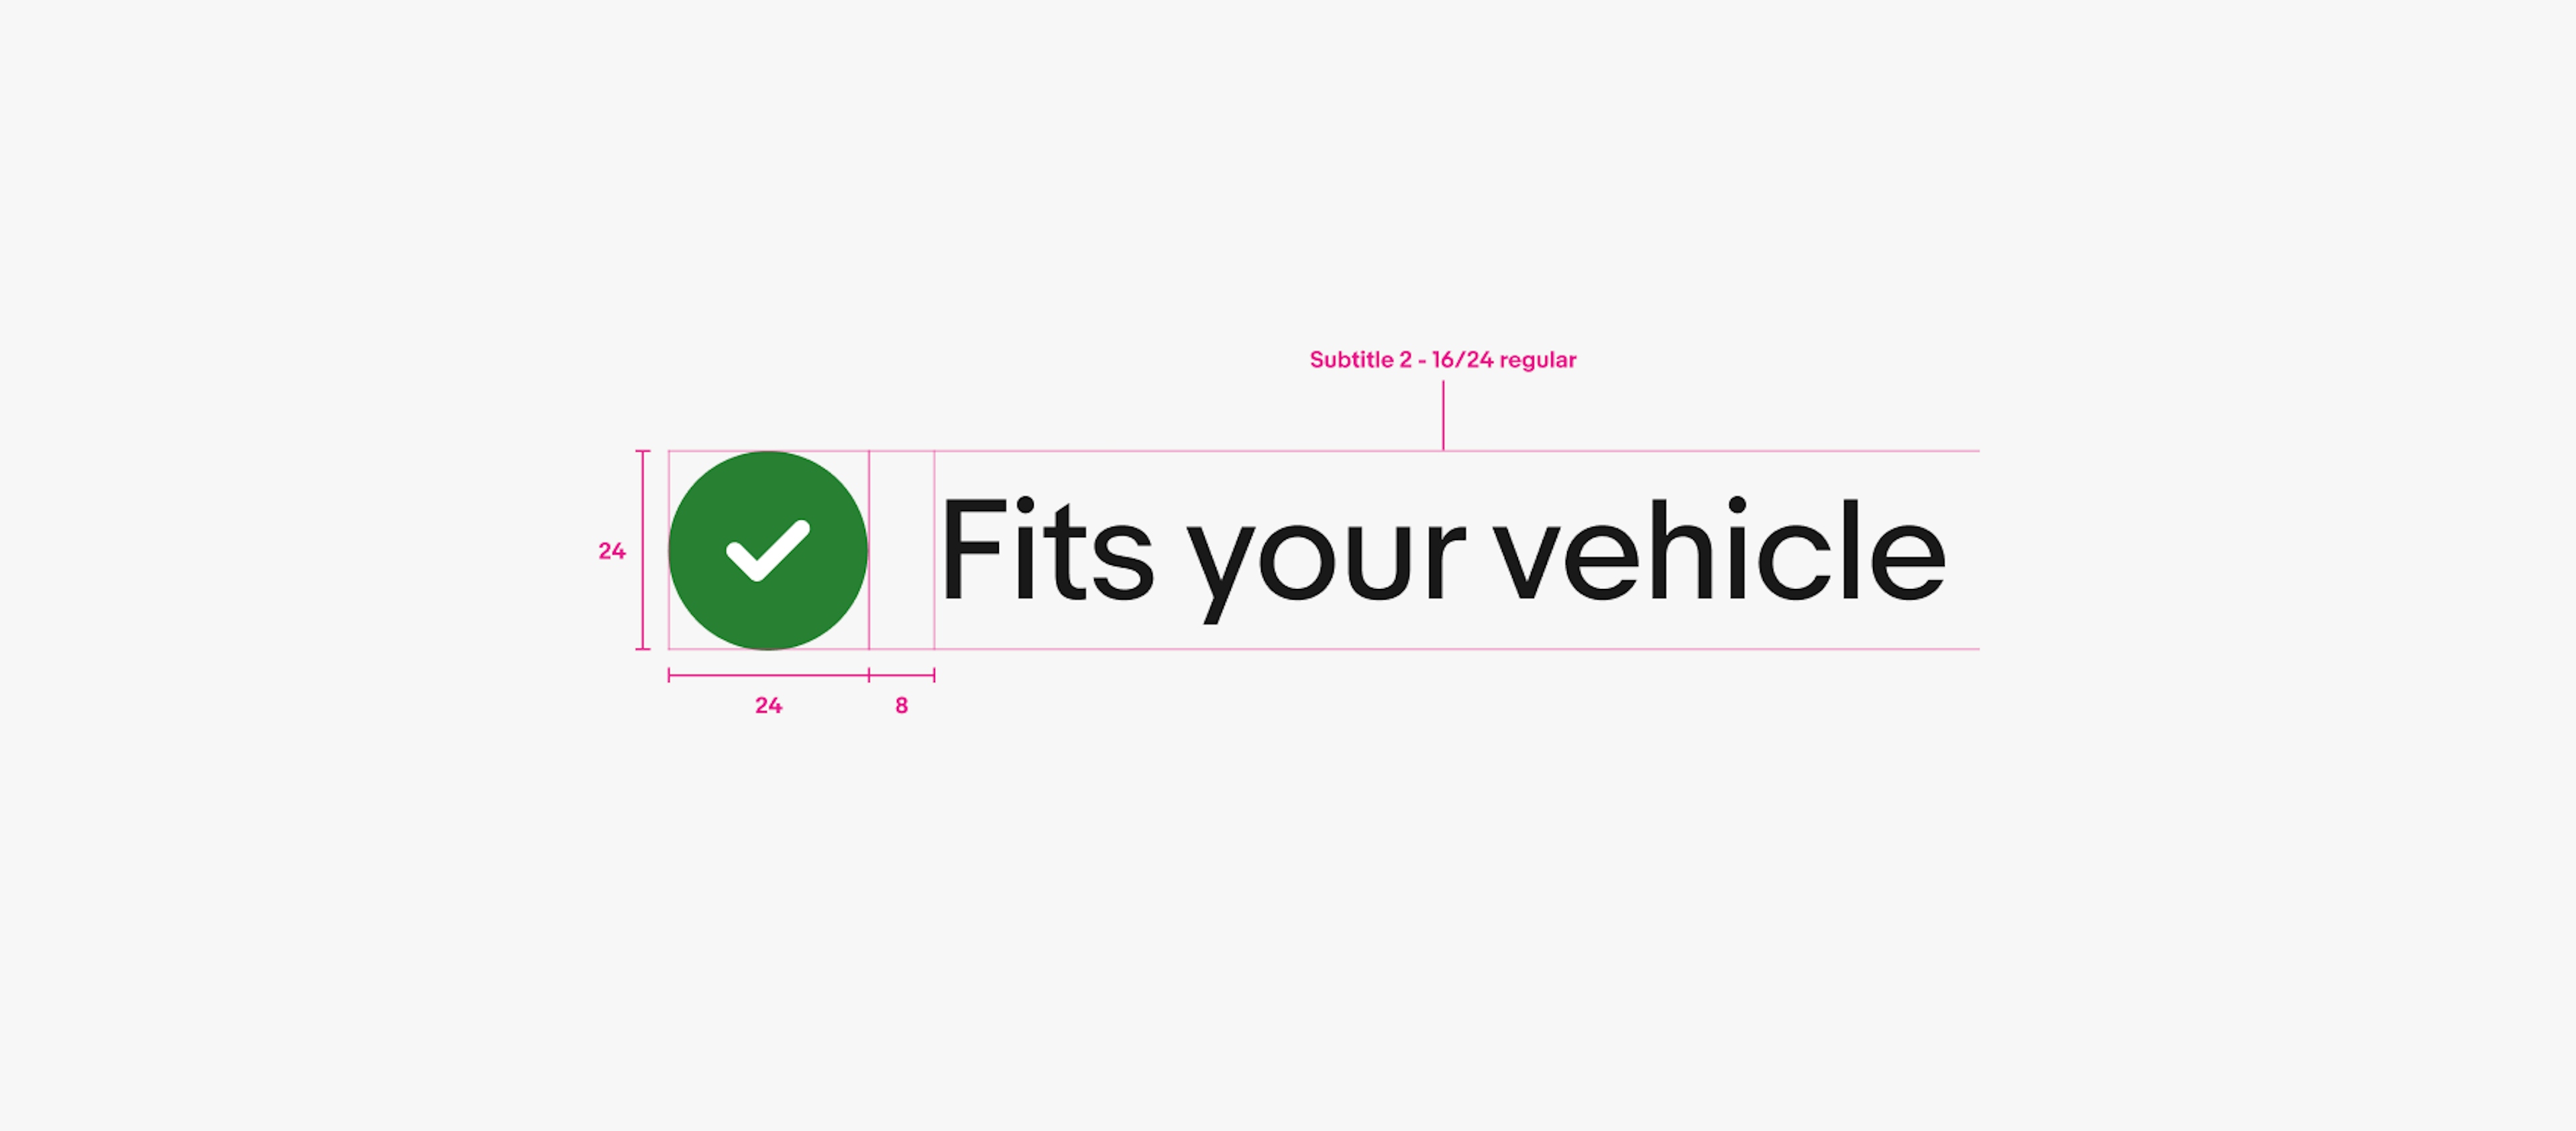 A detailed spec for a confirmation indicator combining icon and text. The green confirmation checkmark is 24px, followed by 8px of space, and then “Fits your vehicle” text using the Subtitle 2 - 16/24 regular type style.